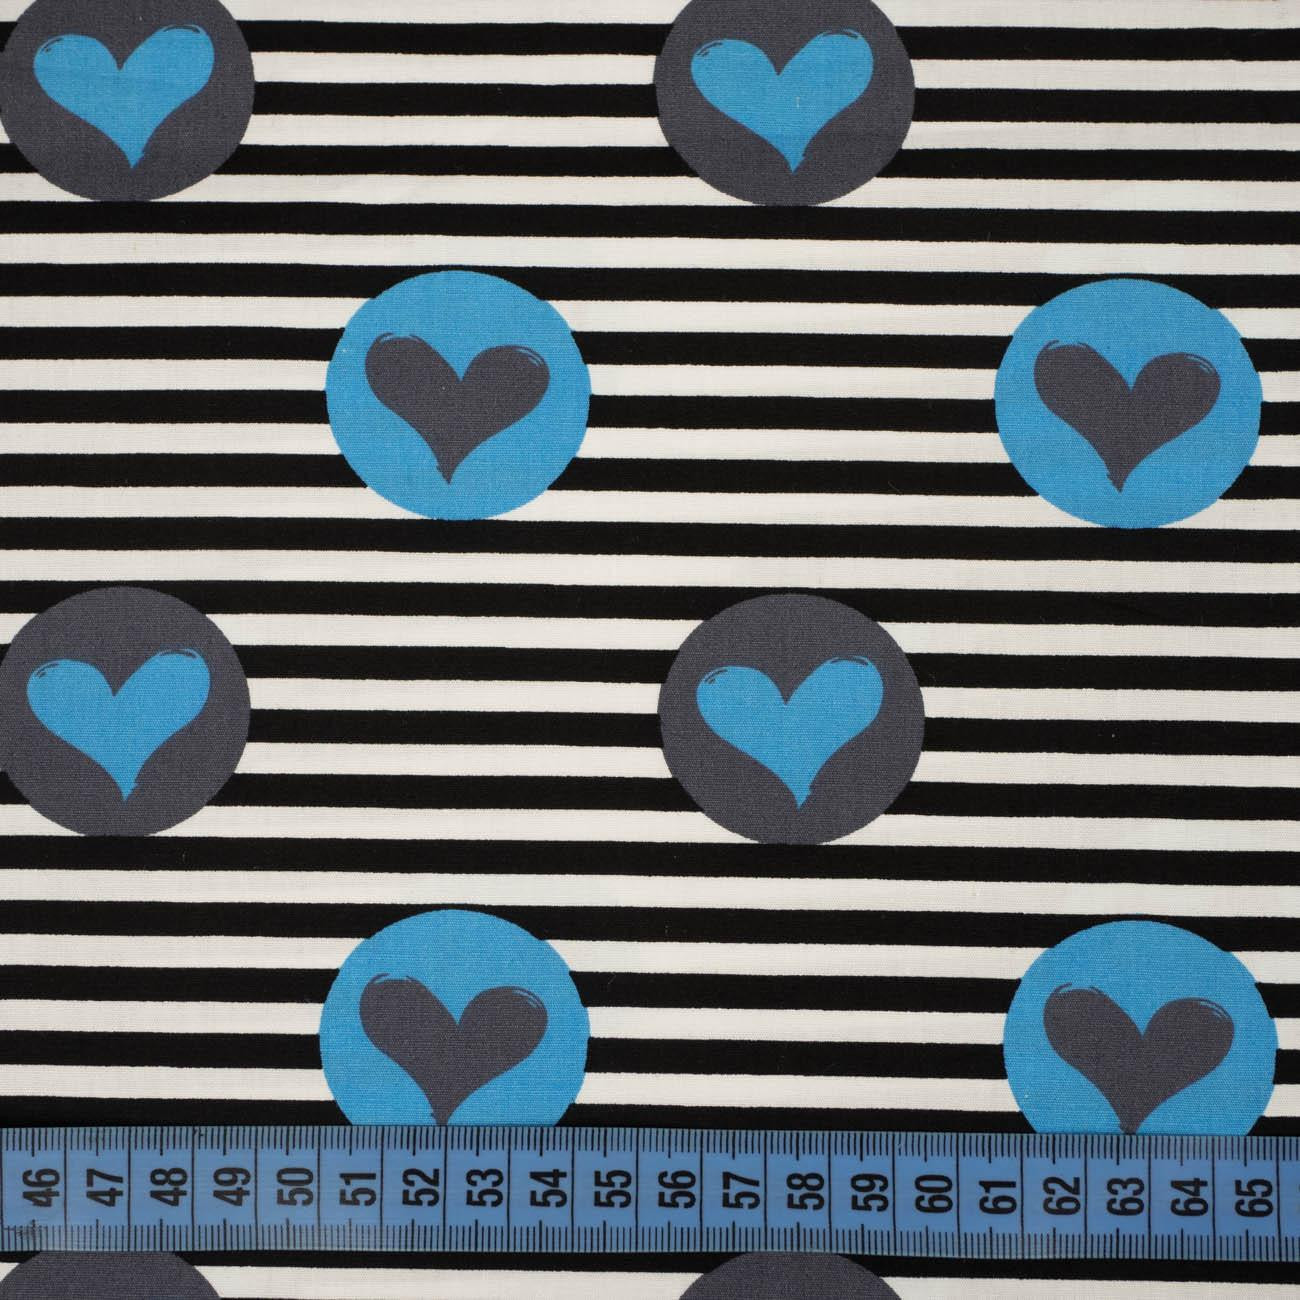 TURQUOISE HEARTS / stripes -  Cotton woven fabric